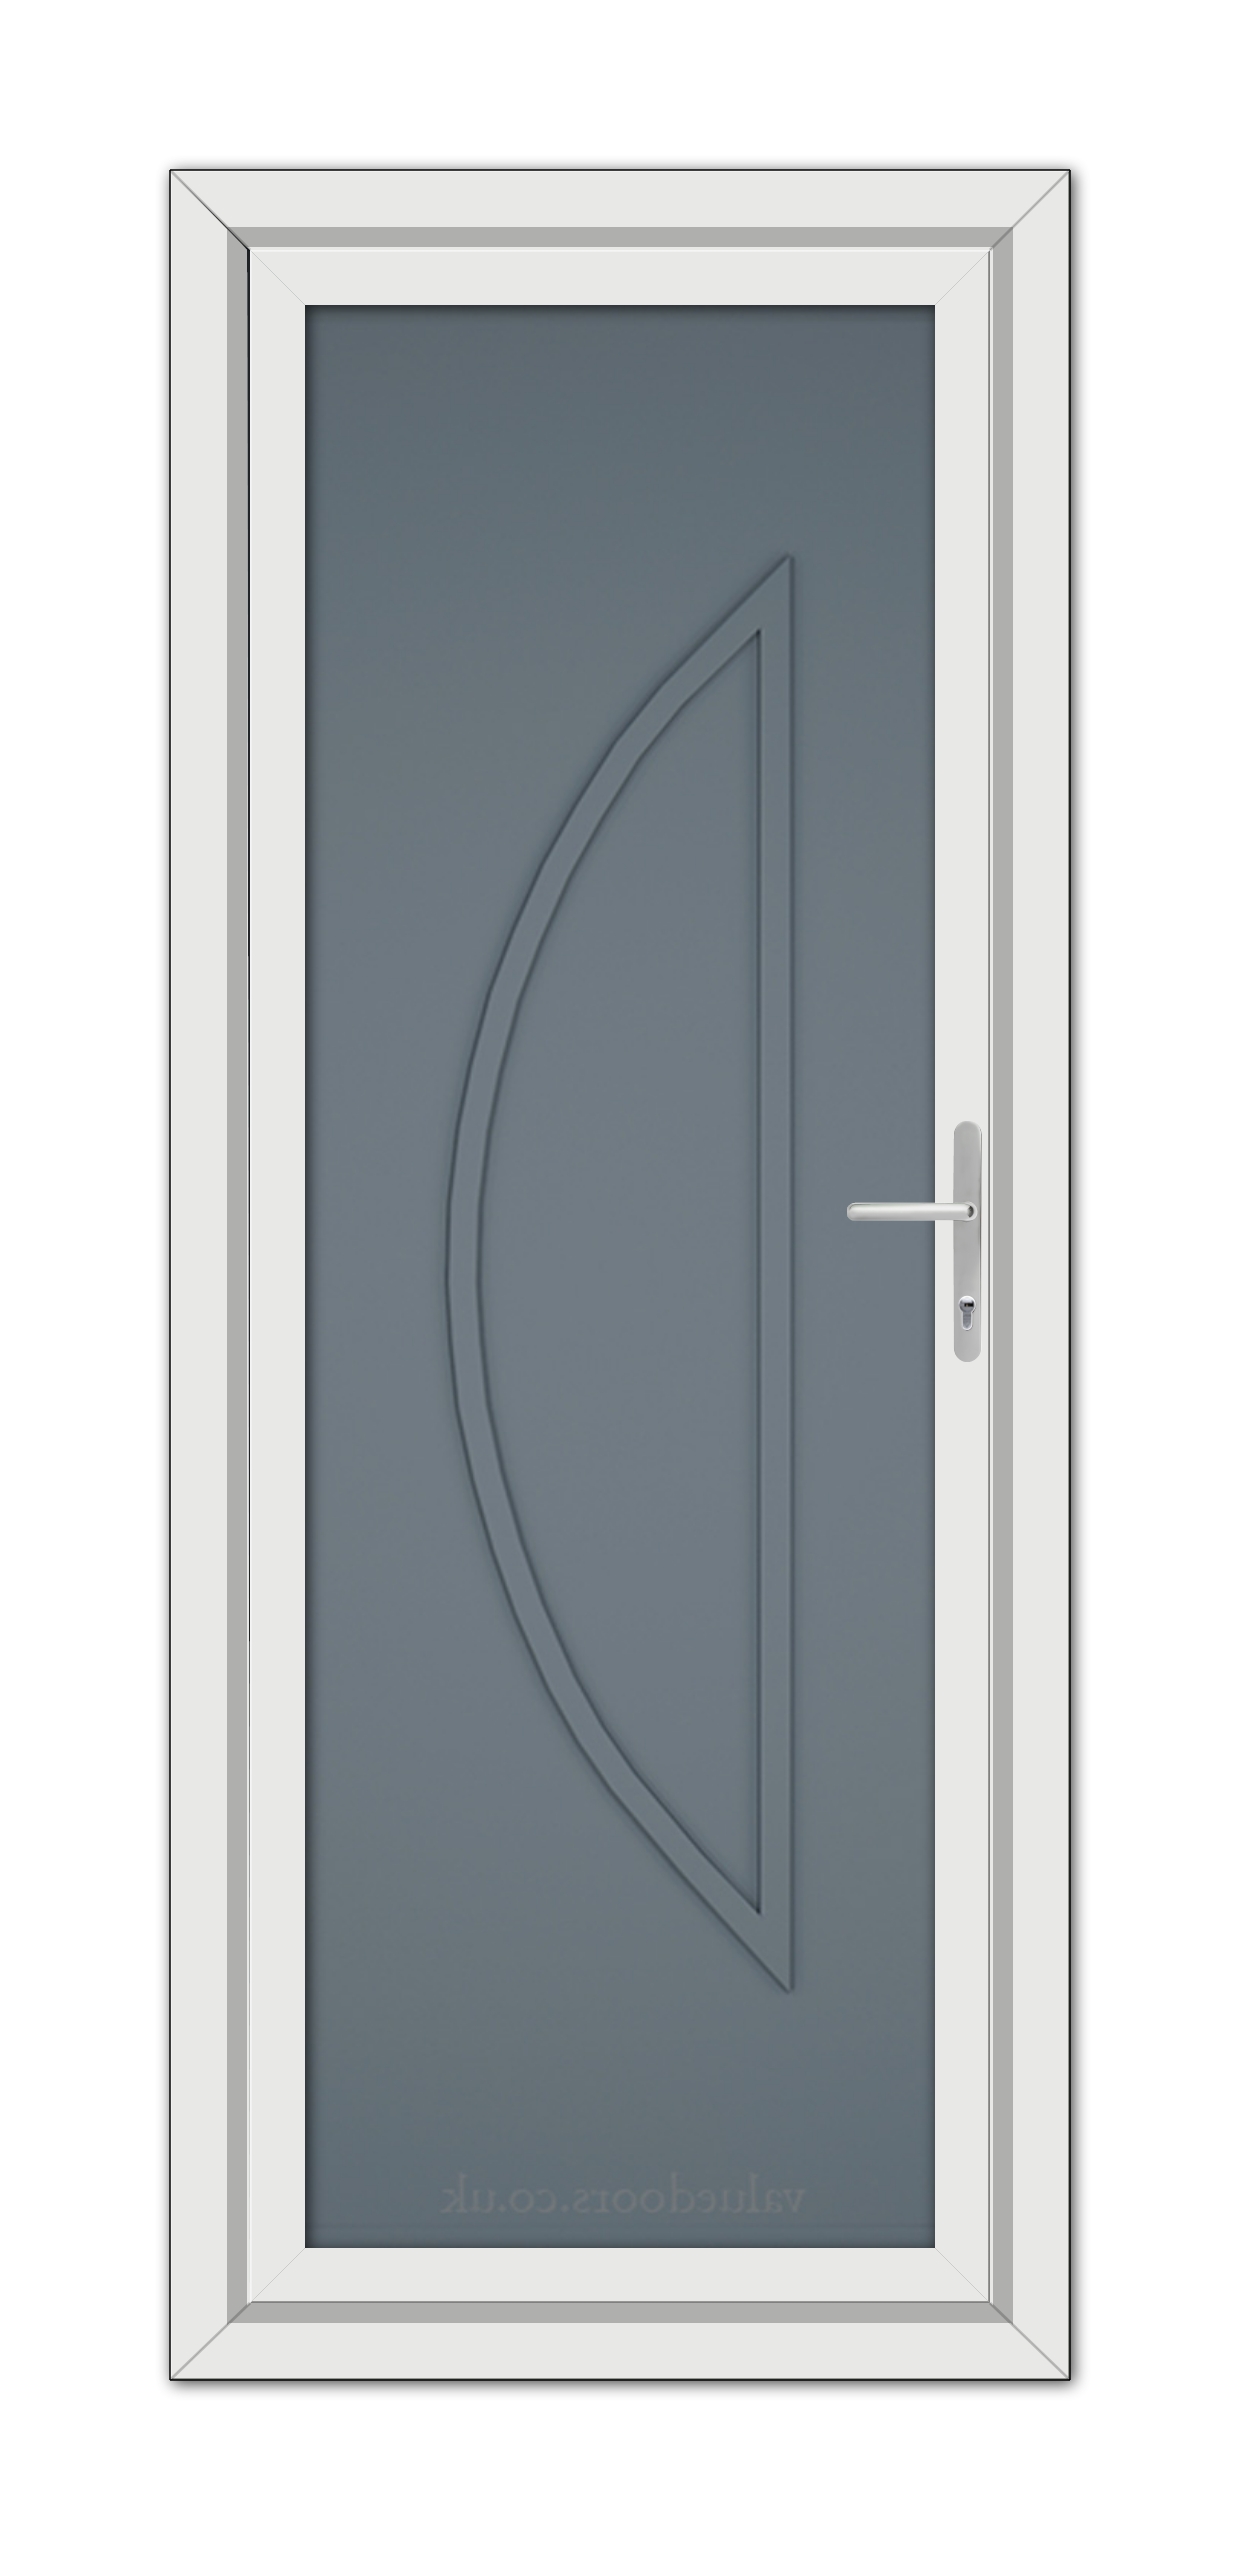 Slate Grey Modern 5051 Solid uPVC Door with a curved design.